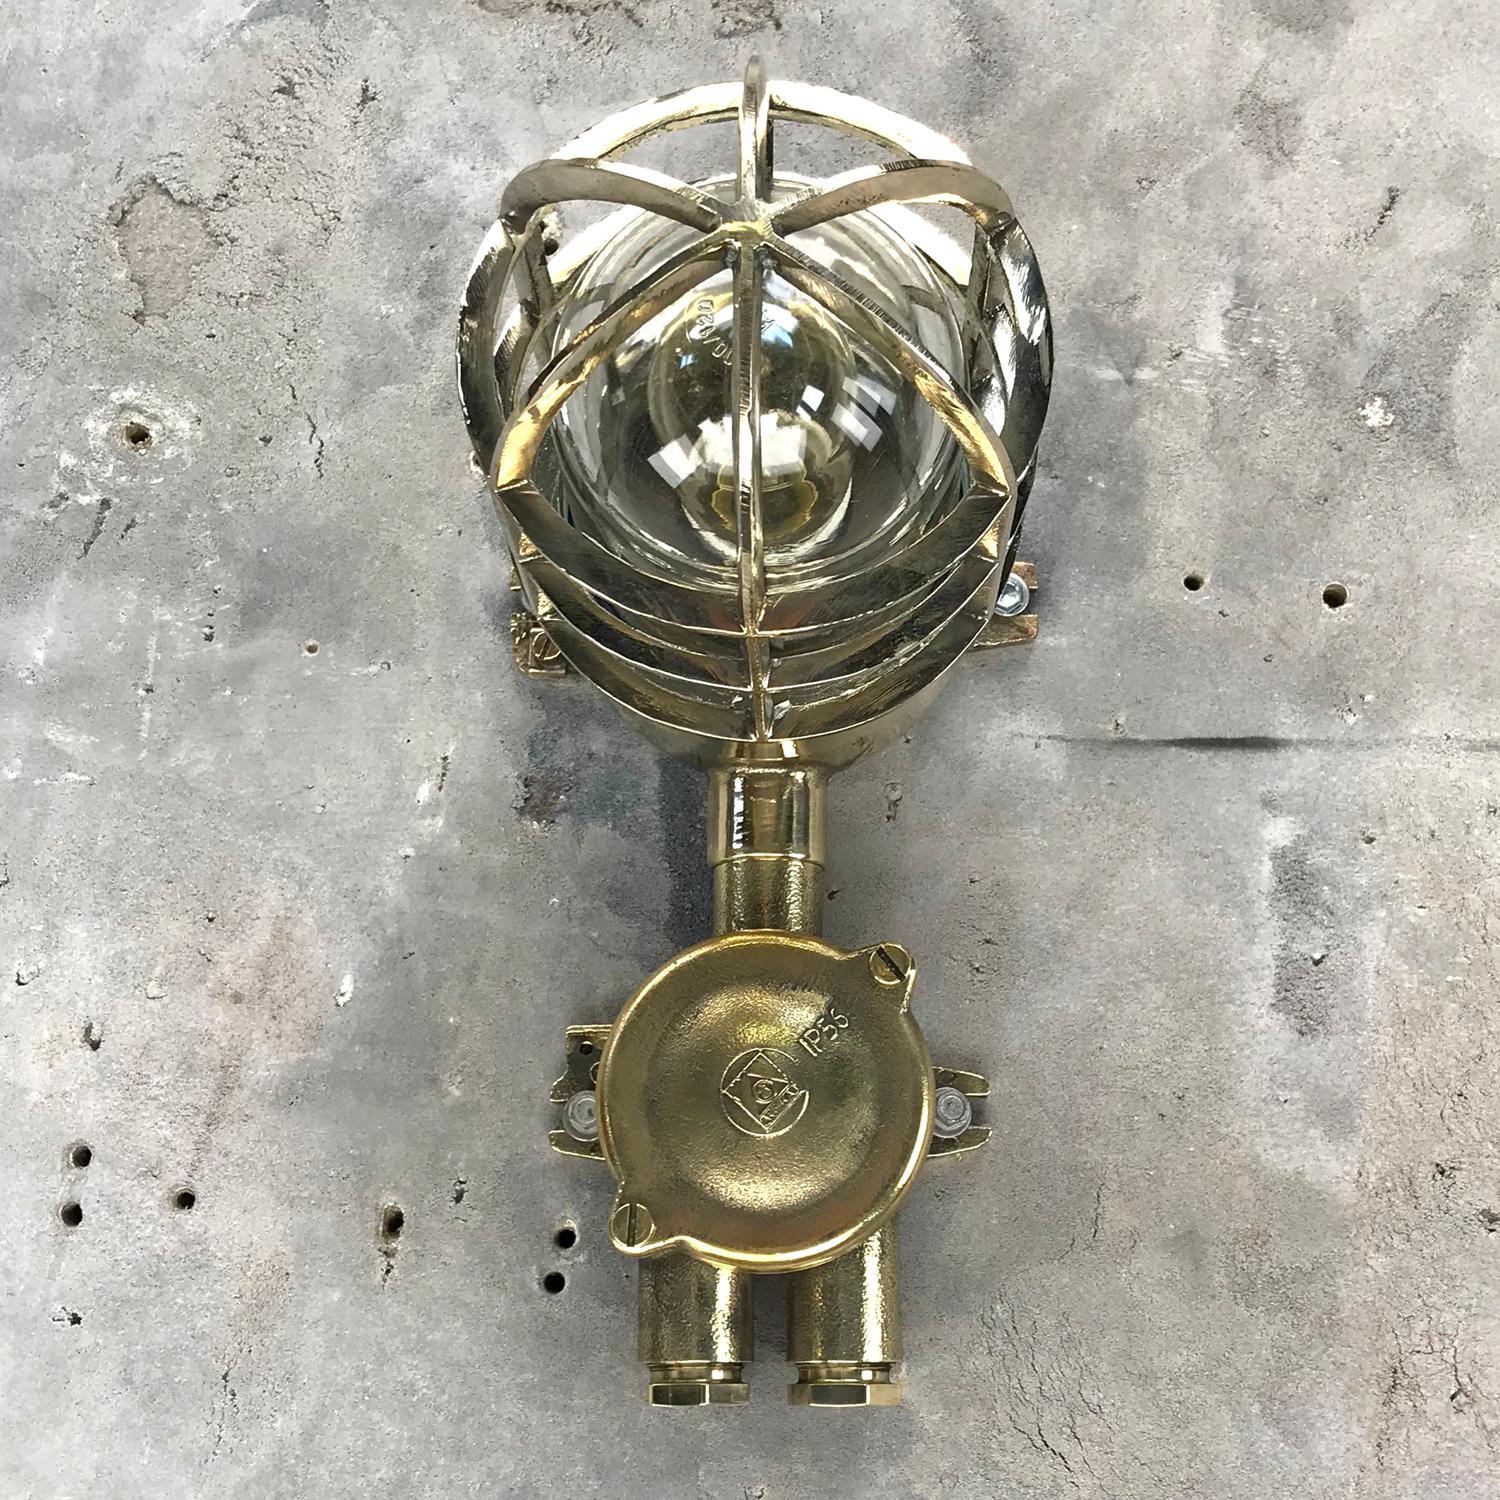 1970s German Explosion Proof Wall Light Cast Brass, Glass Shade and Junction Box 3